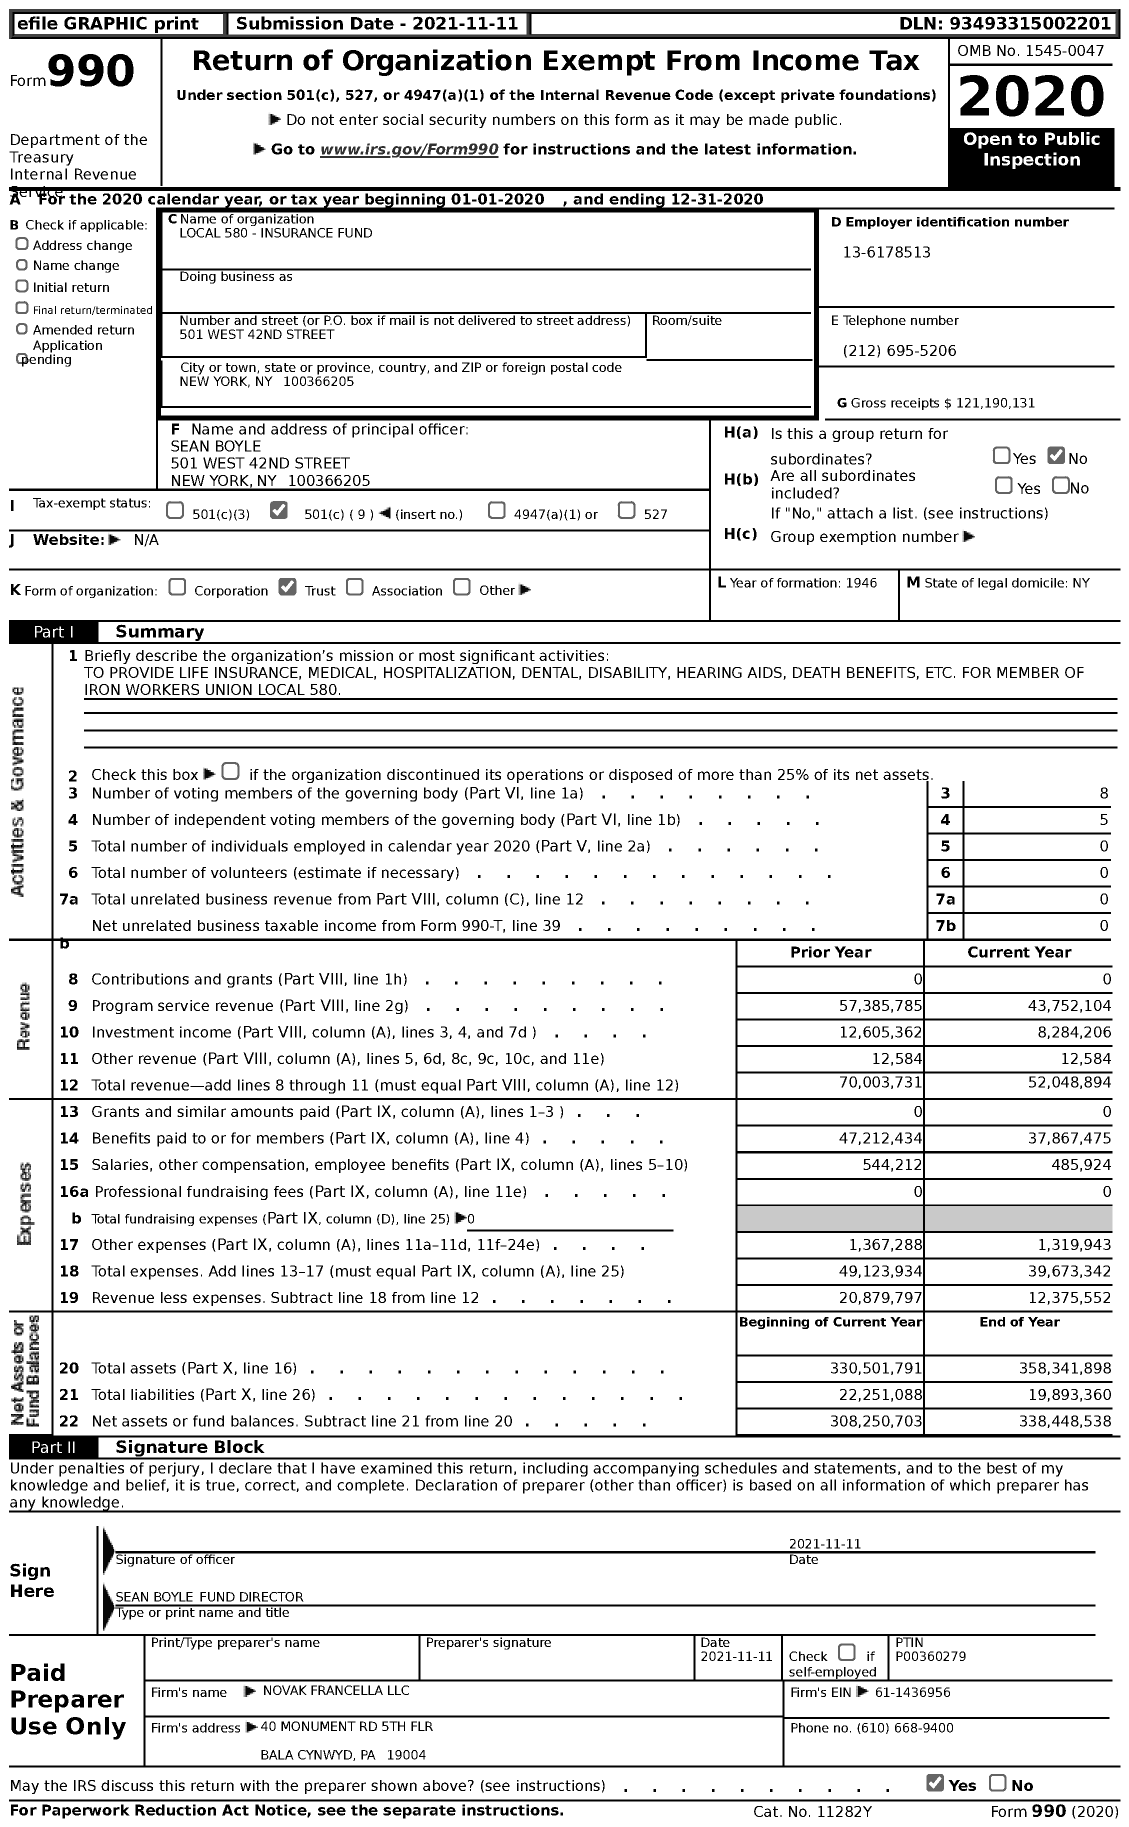 Image of first page of 2020 Form 990 for Local 580 Insurance Fund